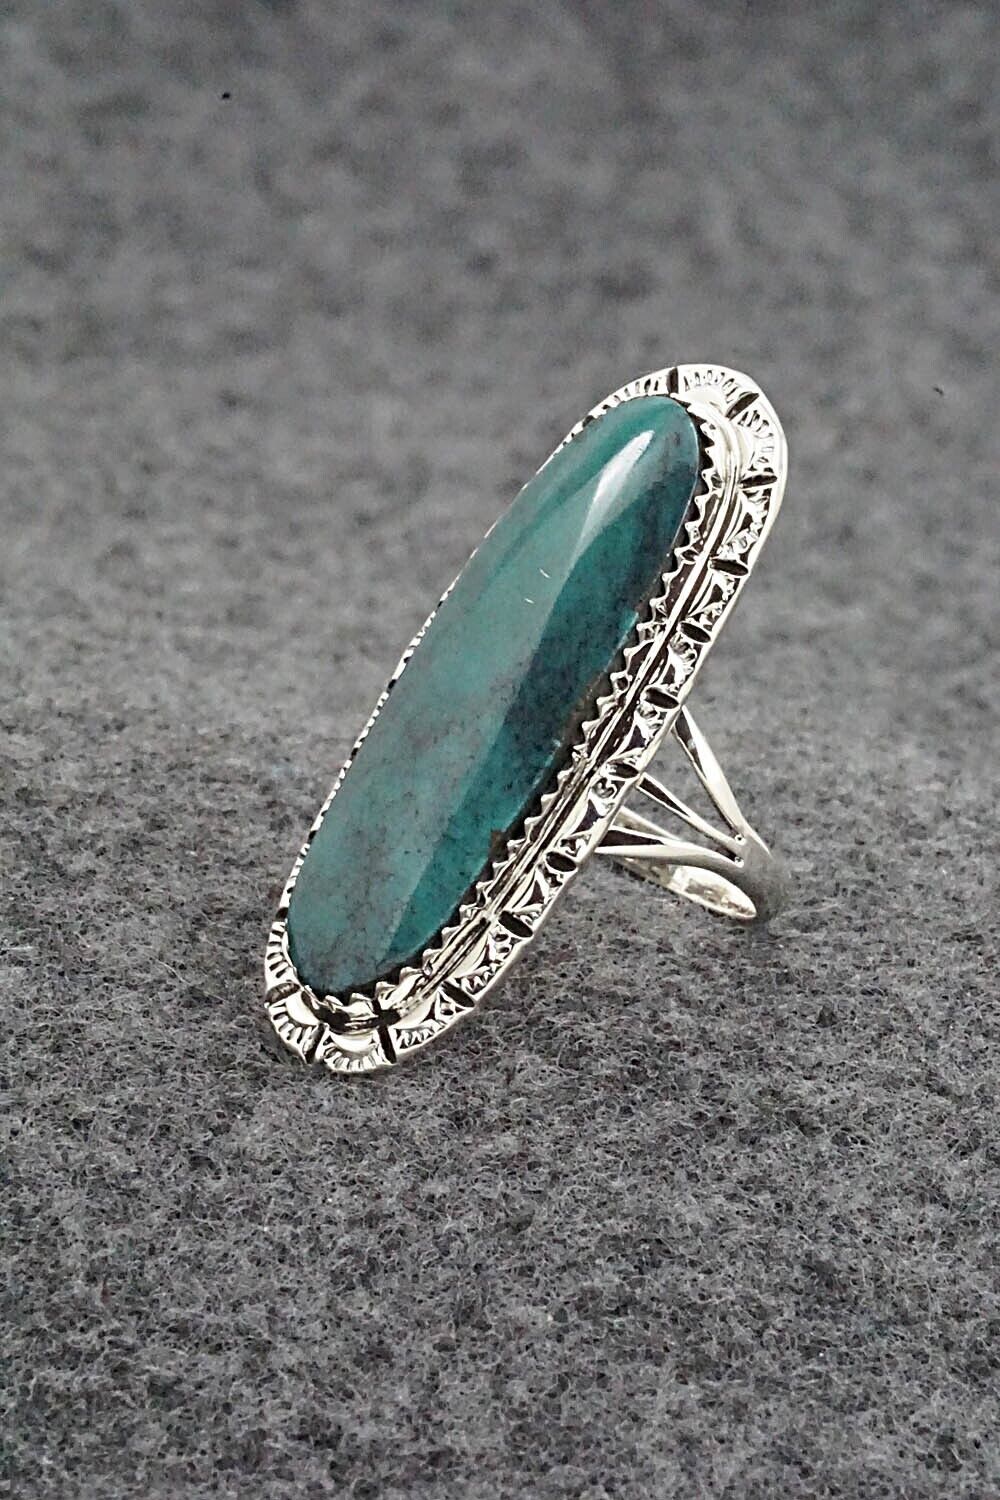 Turquoise & Sterling Silver Ring - Mike Smith - Size 6